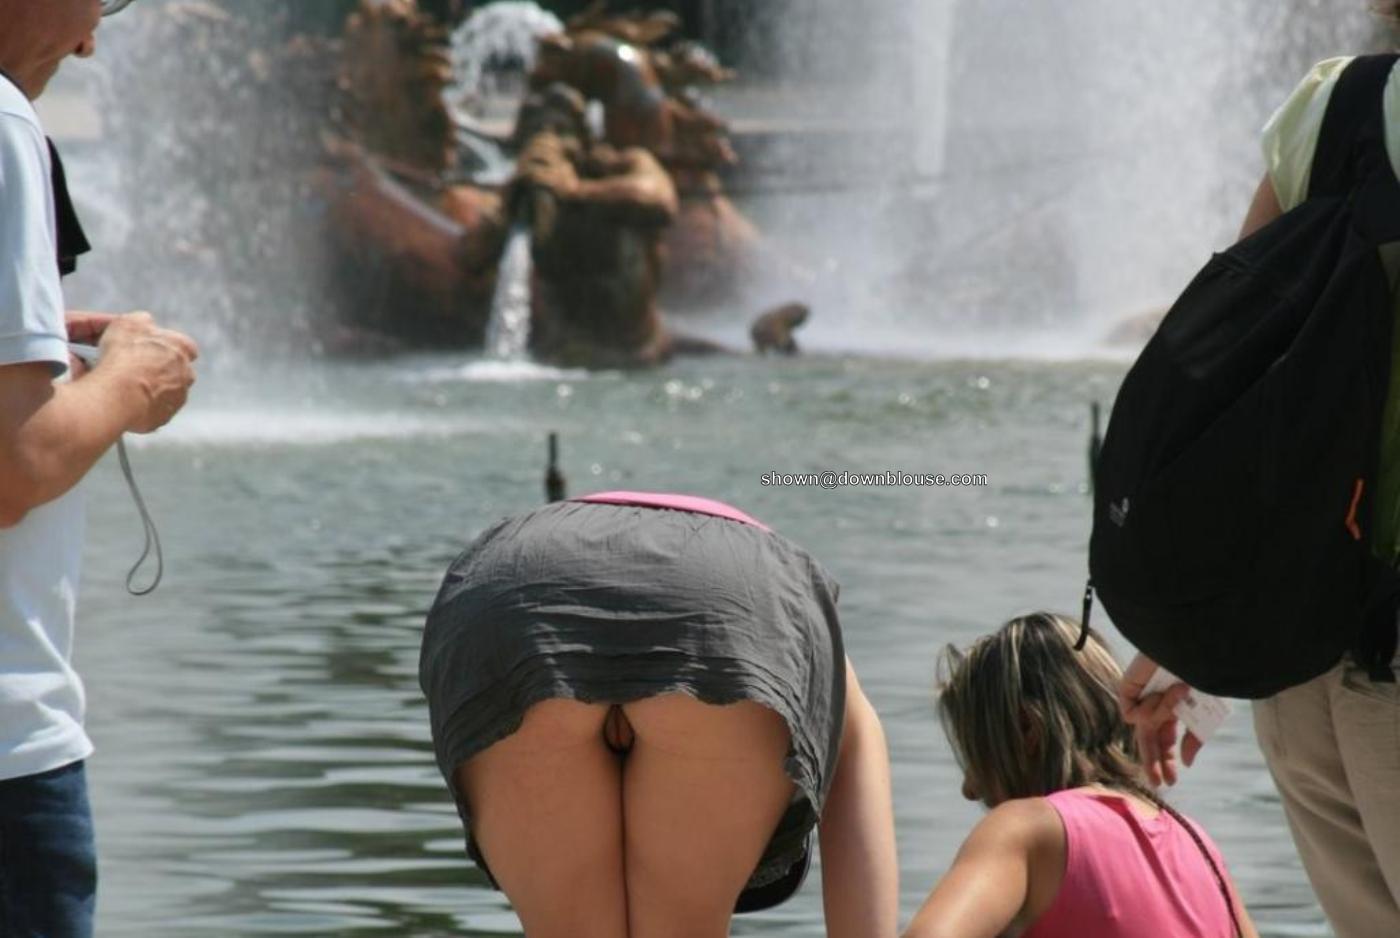 Trevi-s fountain and pussy slip upskirt from our OFF TOPIC AREA Candid boob fails and wardrobe malfunction!